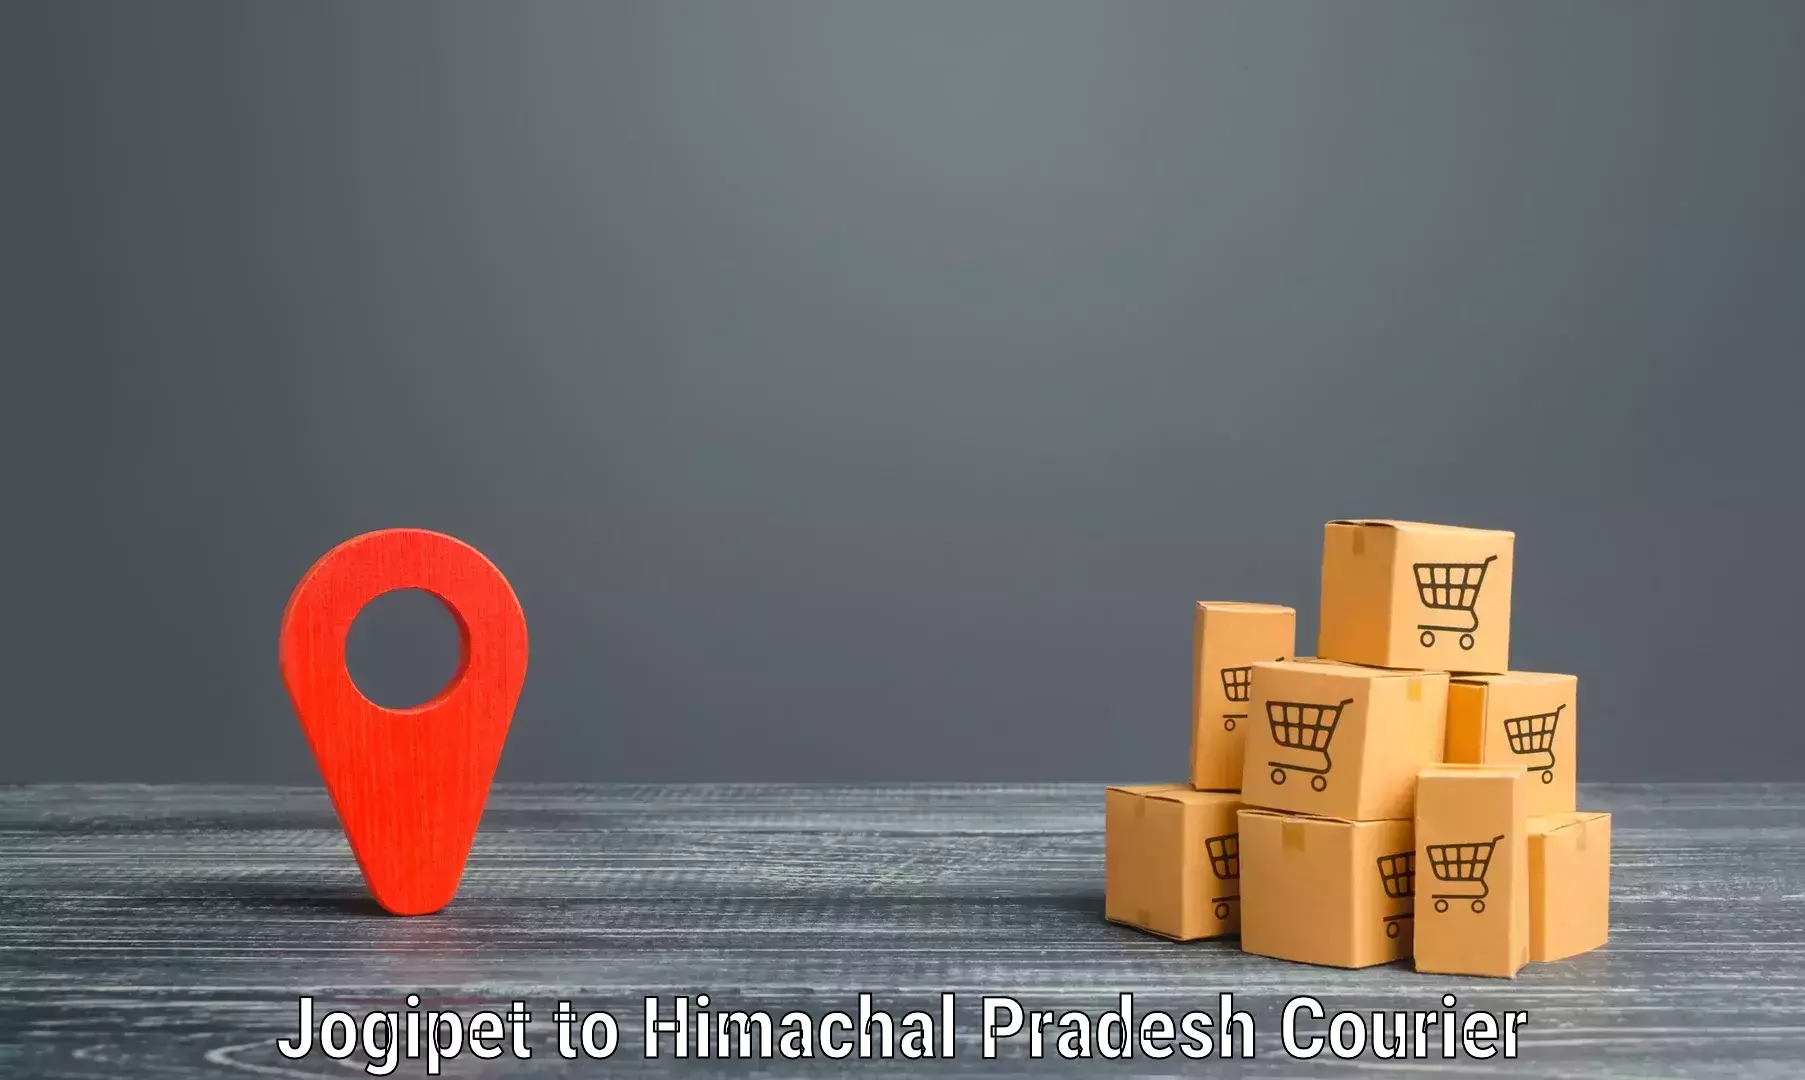 Professional courier services Jogipet to Himachal Pradesh